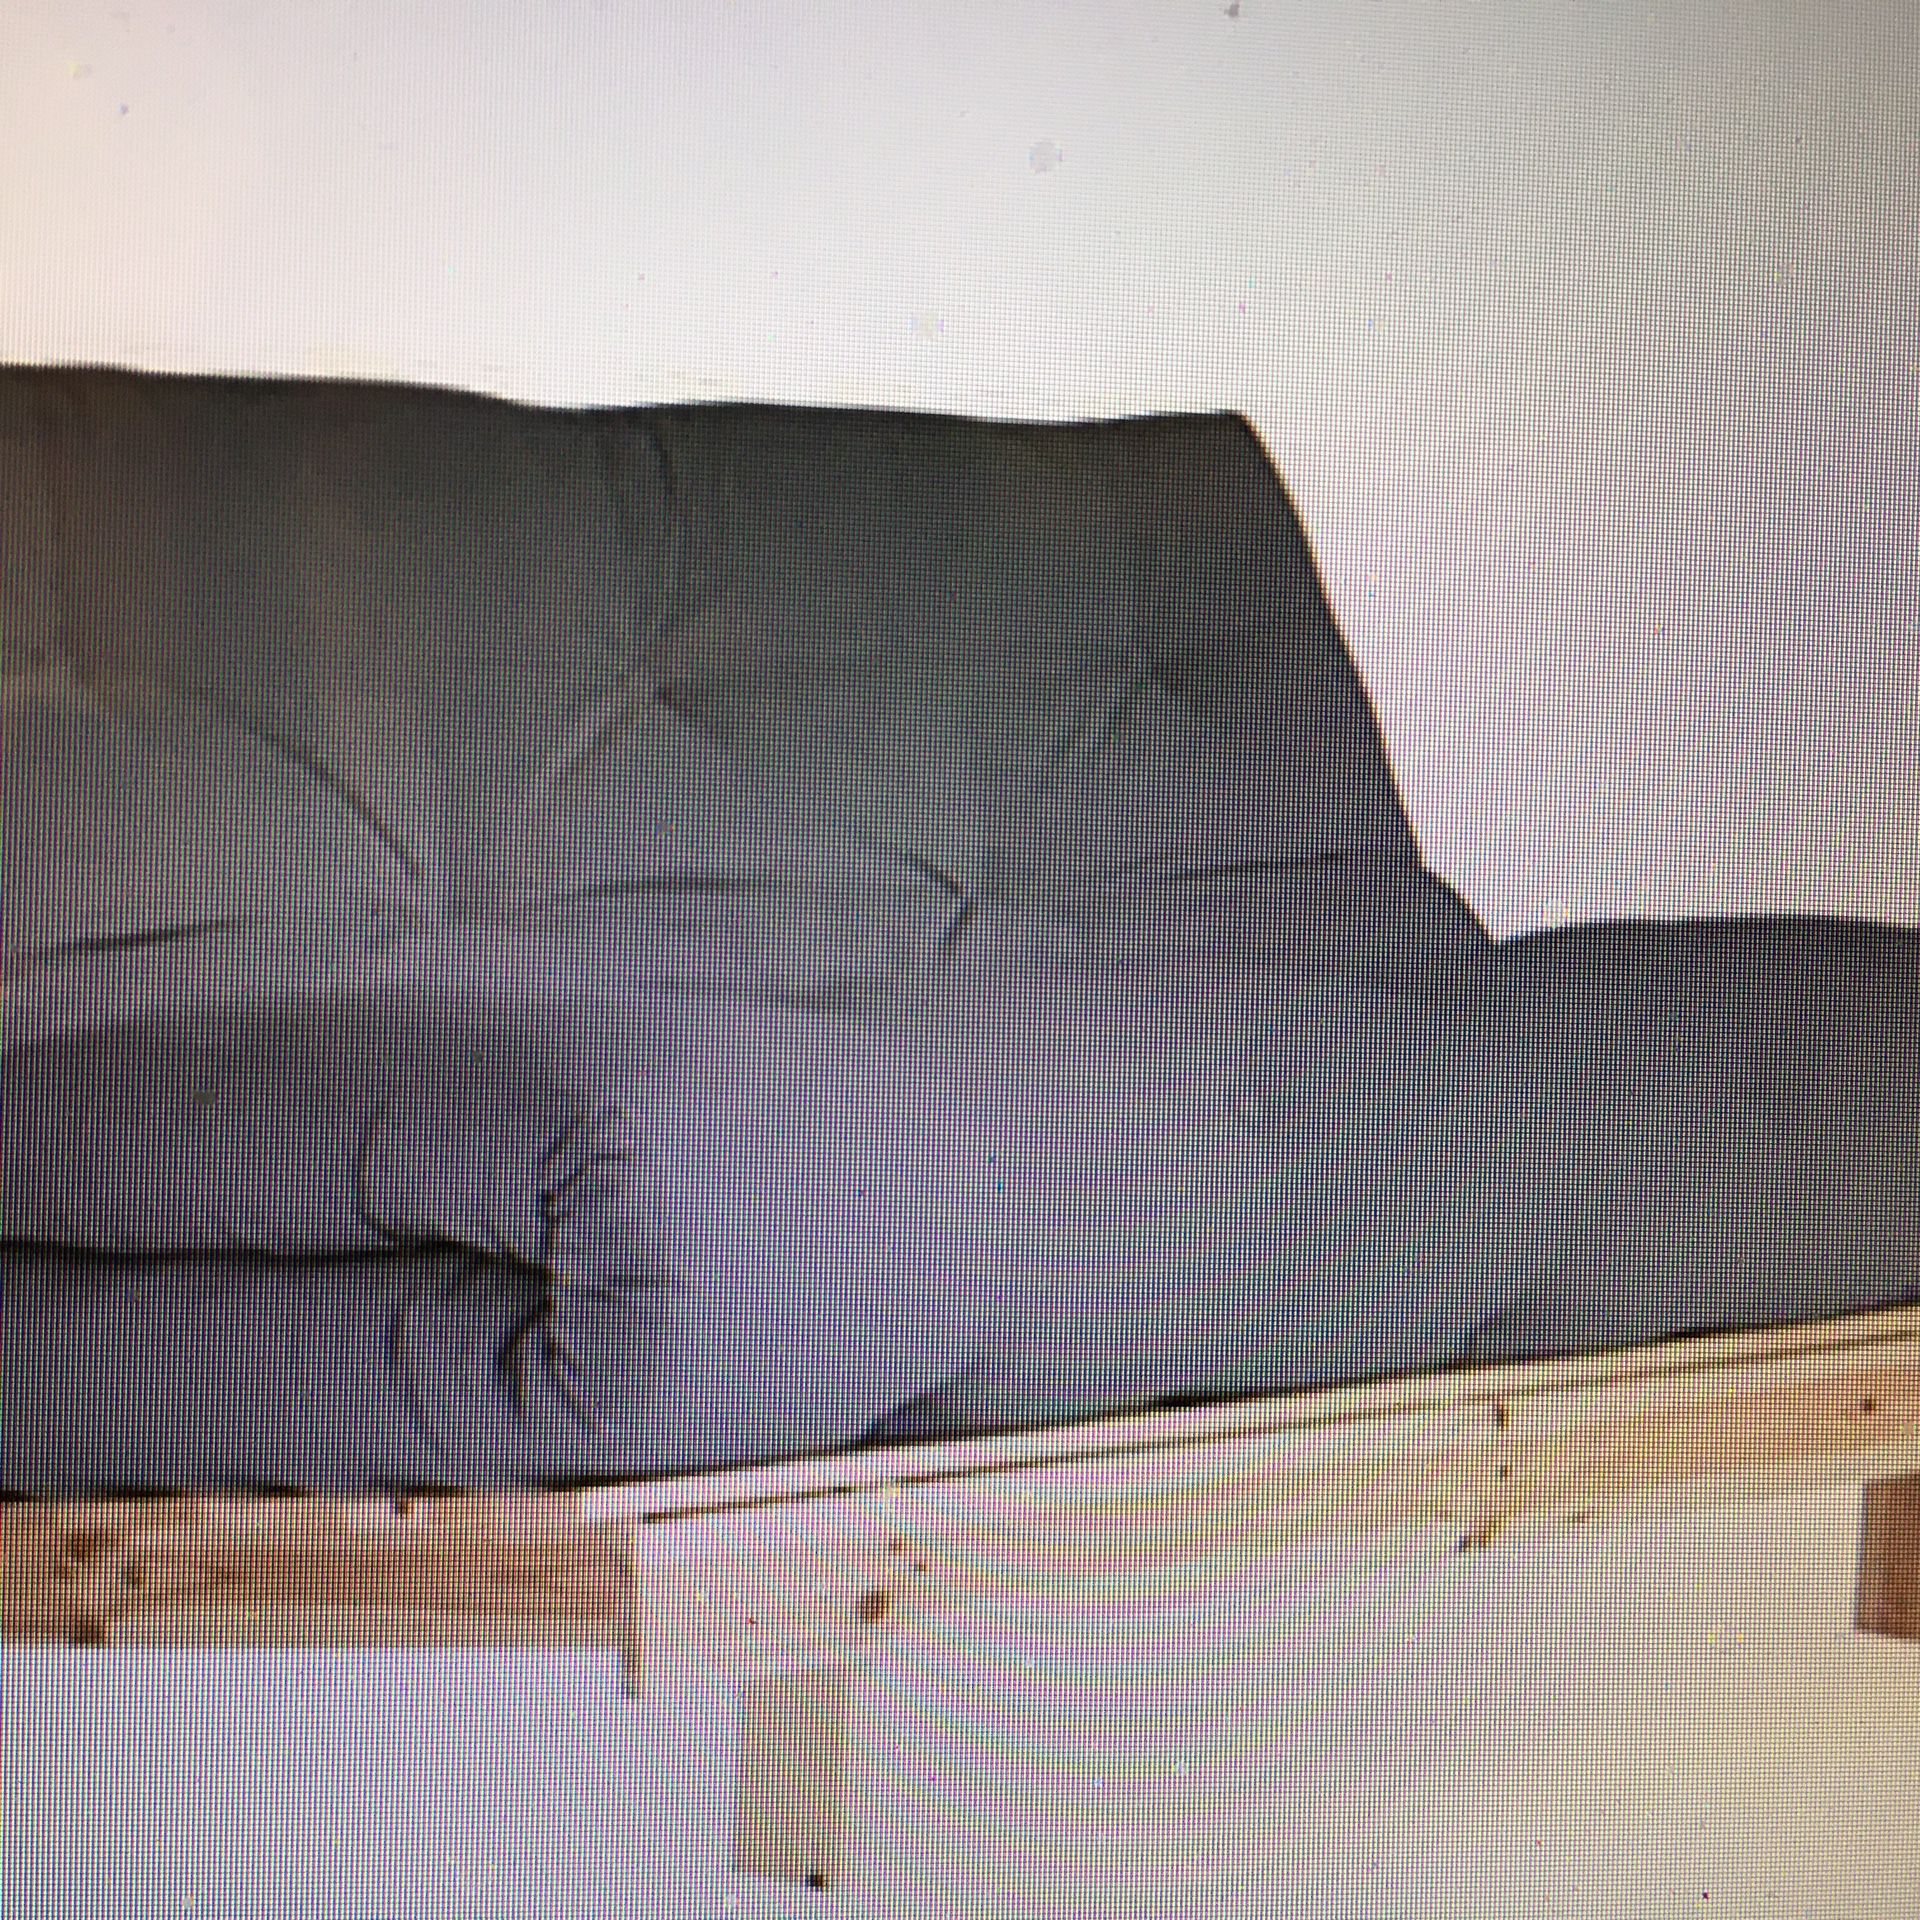 Futon lounger makes full size bed, frame and mattress